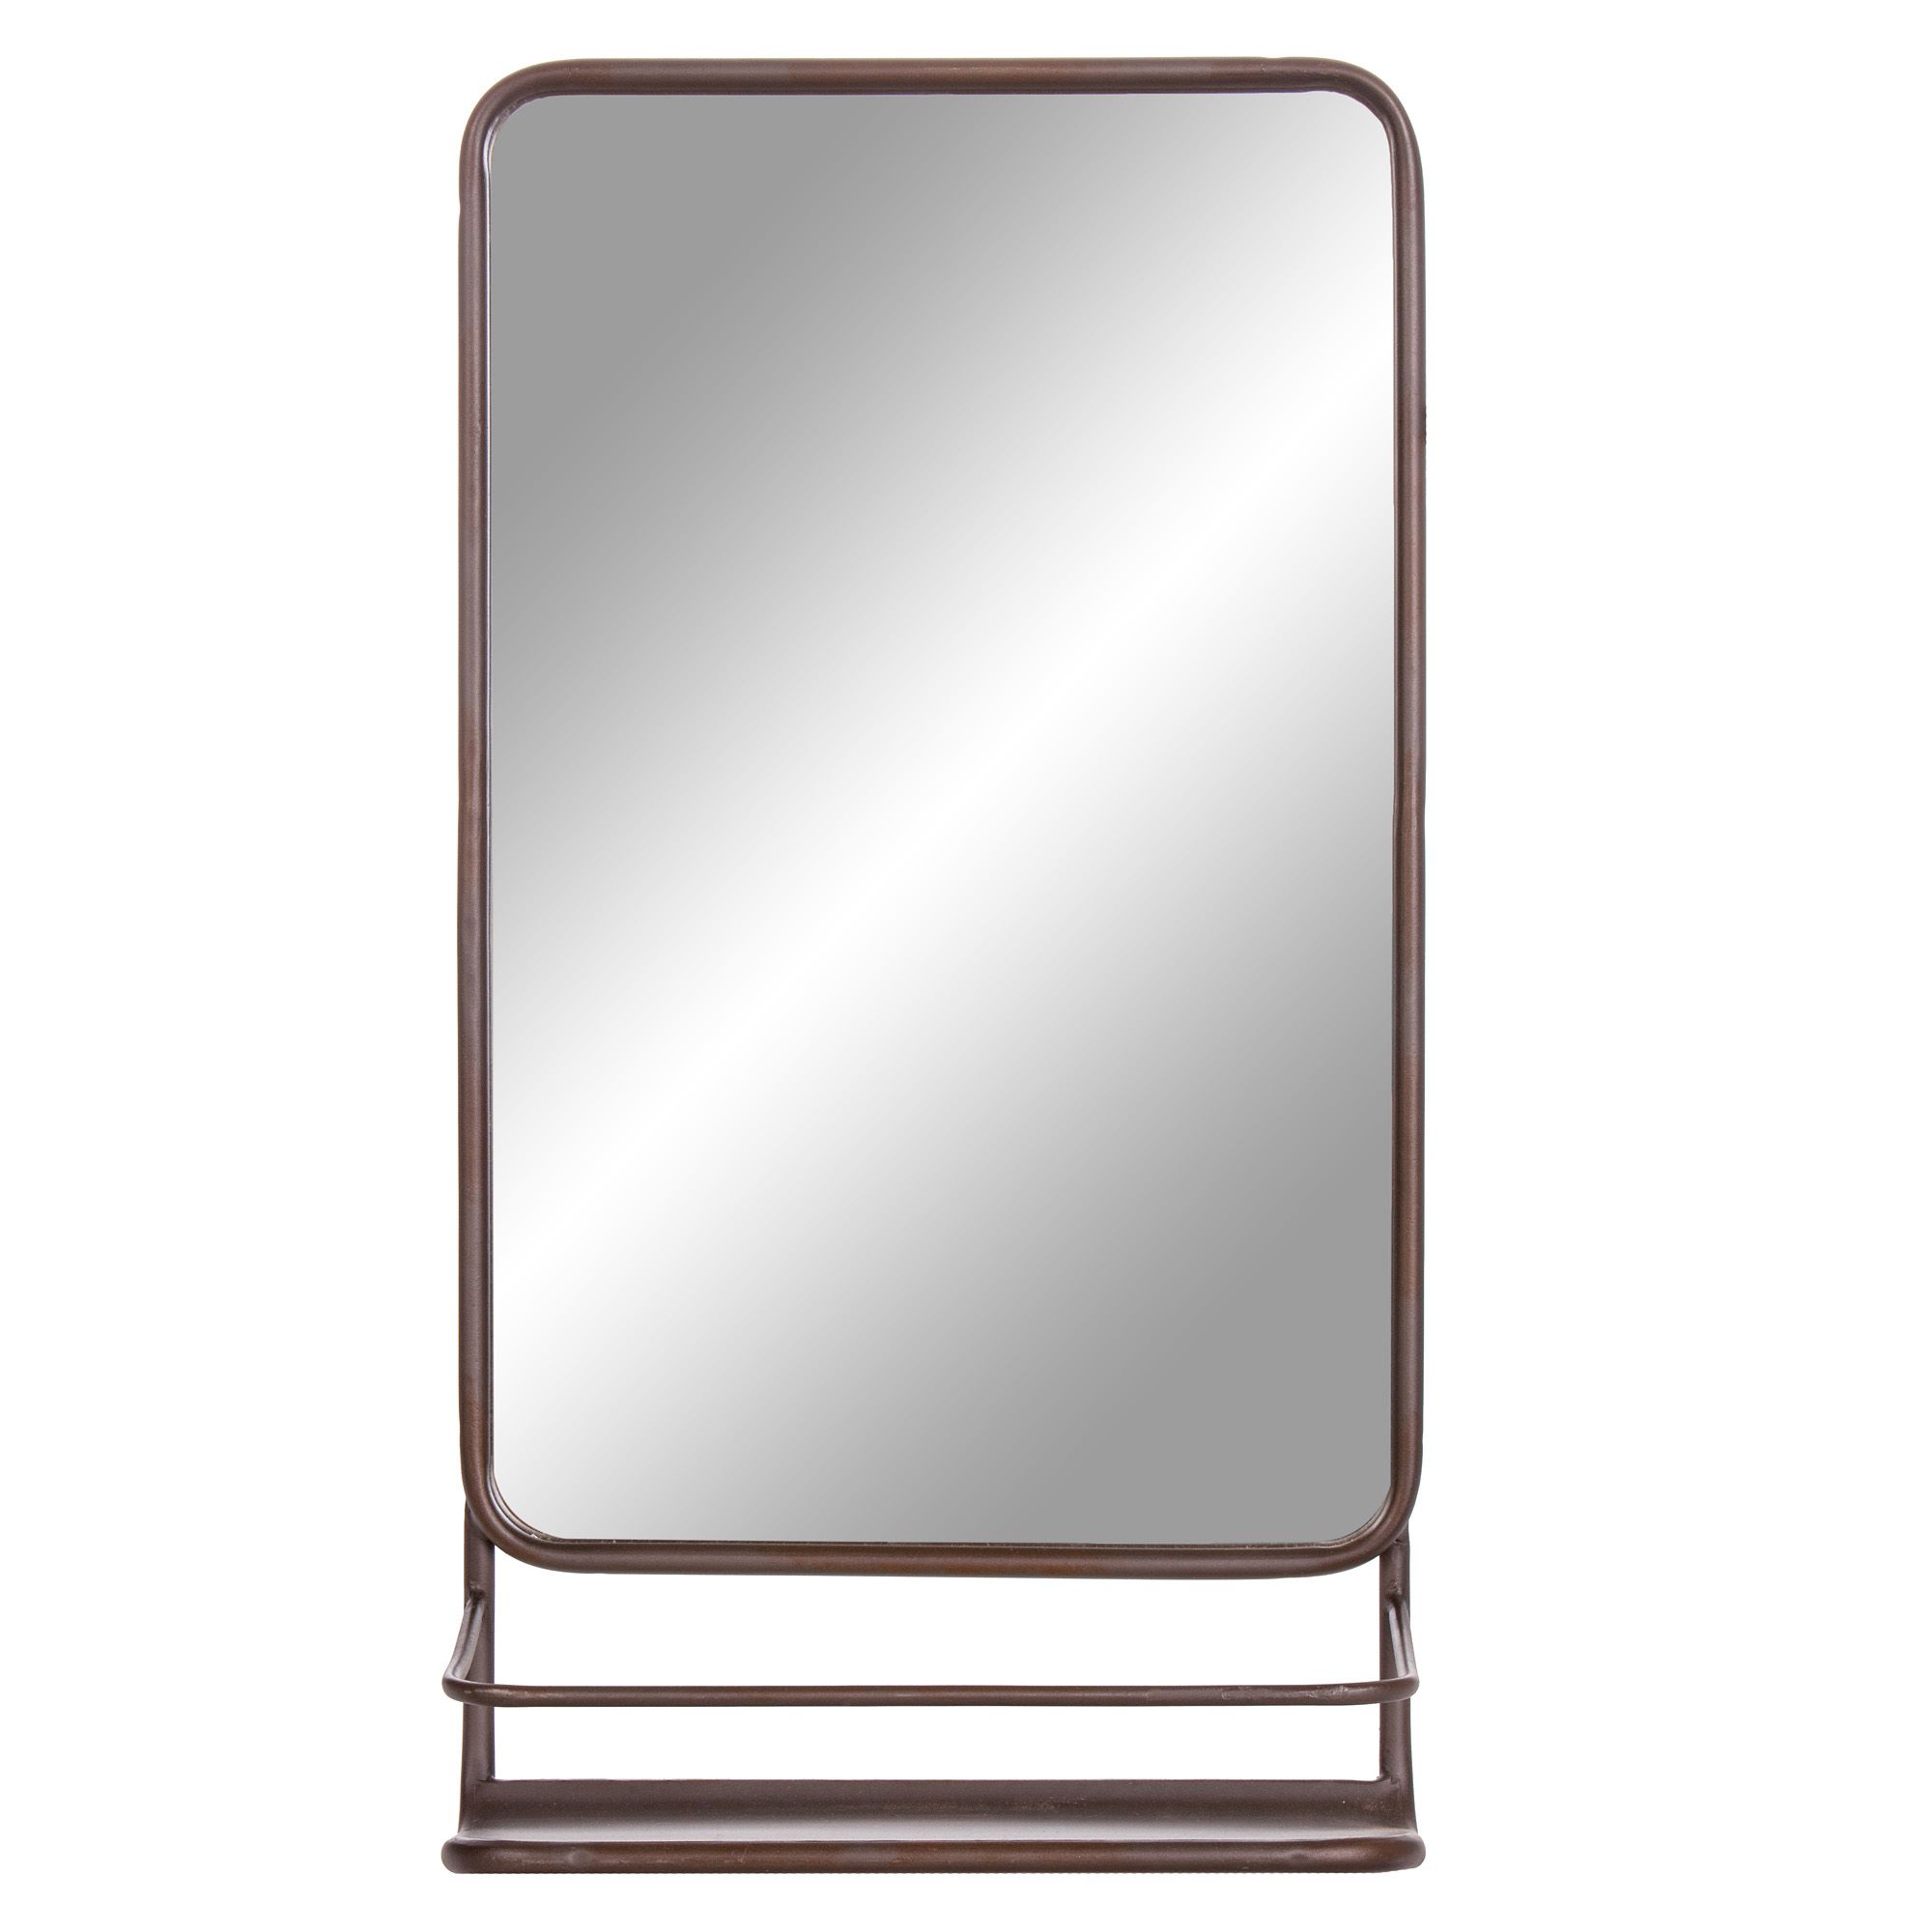 Most Current Woven Bronze Metal Wall Mirrors For Bronze Metal Wall Accent Mirror With Shelf – Walmart (View 10 of 15)